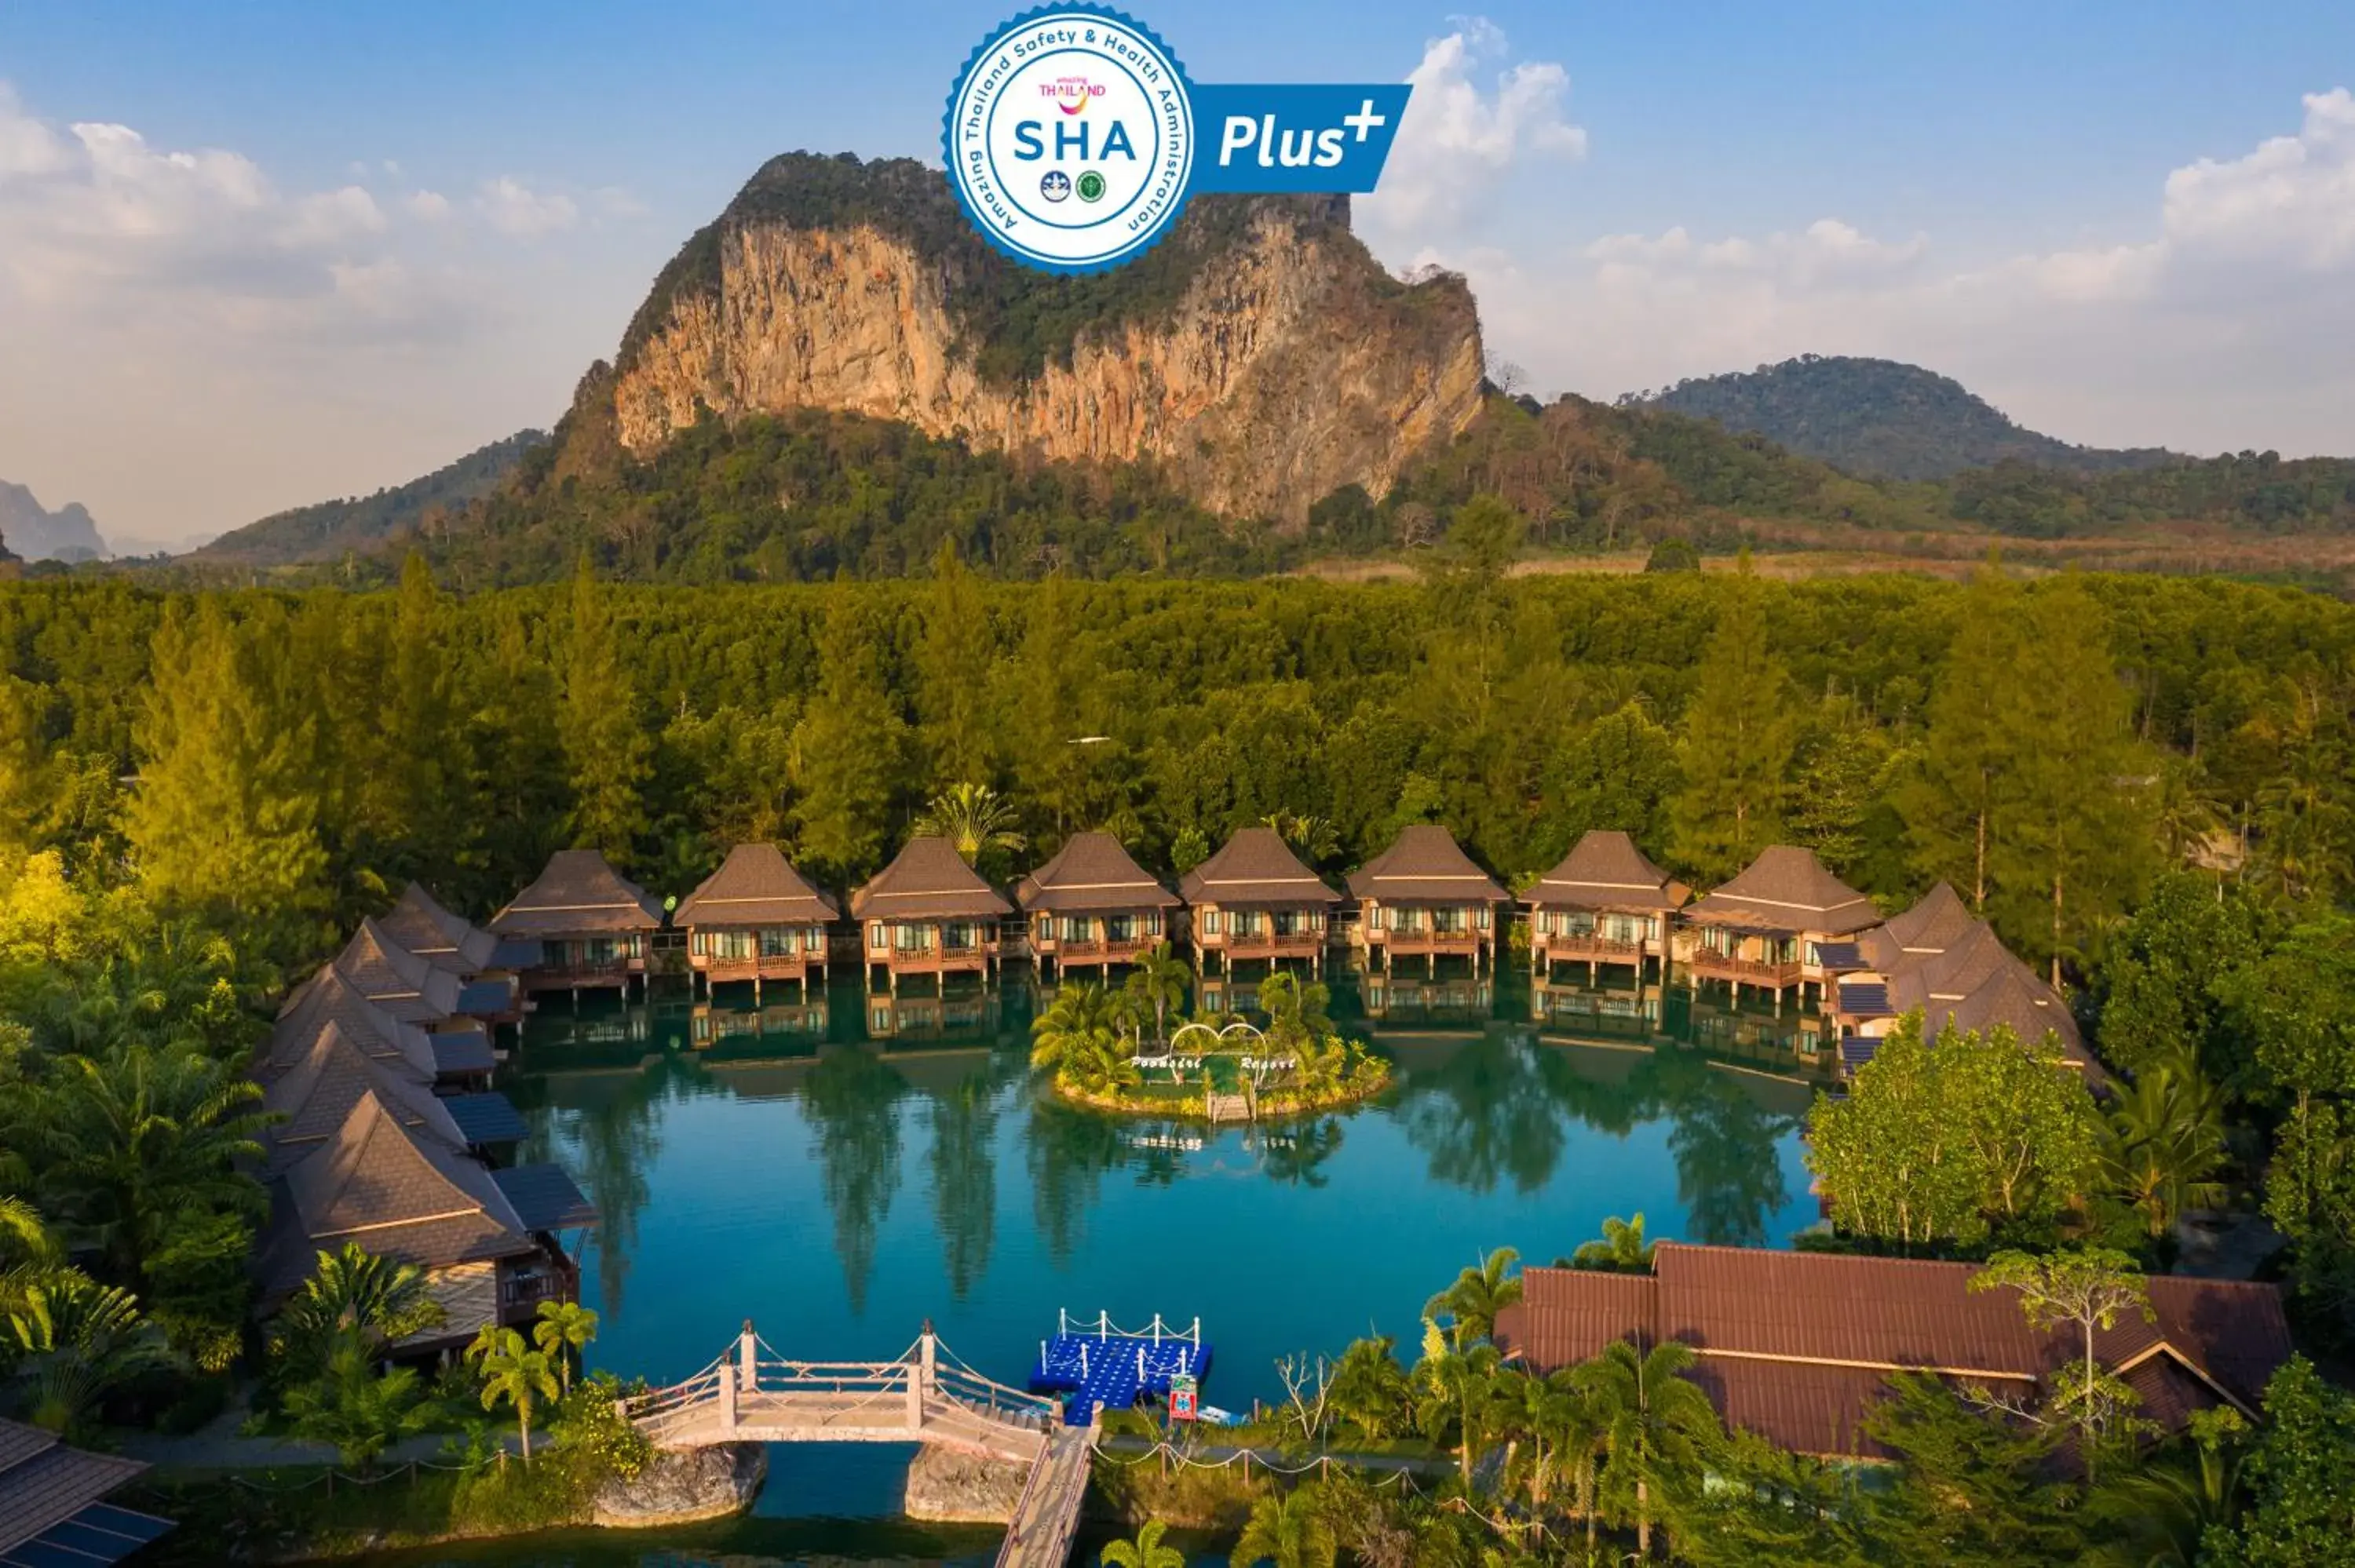 Property building, Pool View in Poonsiri Resort Aonang-SHA Extra Plus -FREE SHUTTLE SERVICE TO THE BEACH